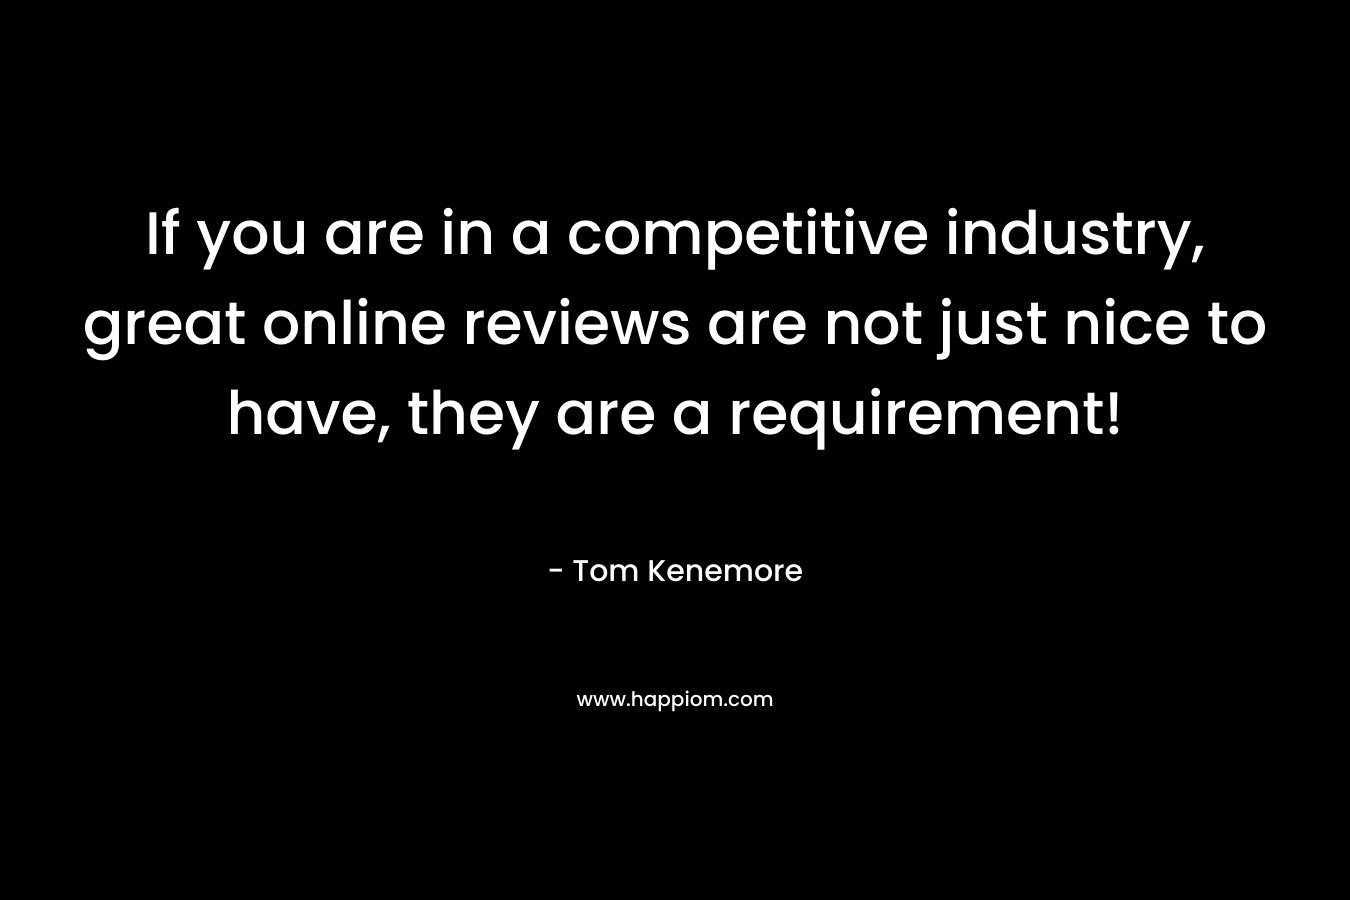 If you are in a competitive industry, great online reviews are not just nice to have, they are a requirement! – Tom Kenemore